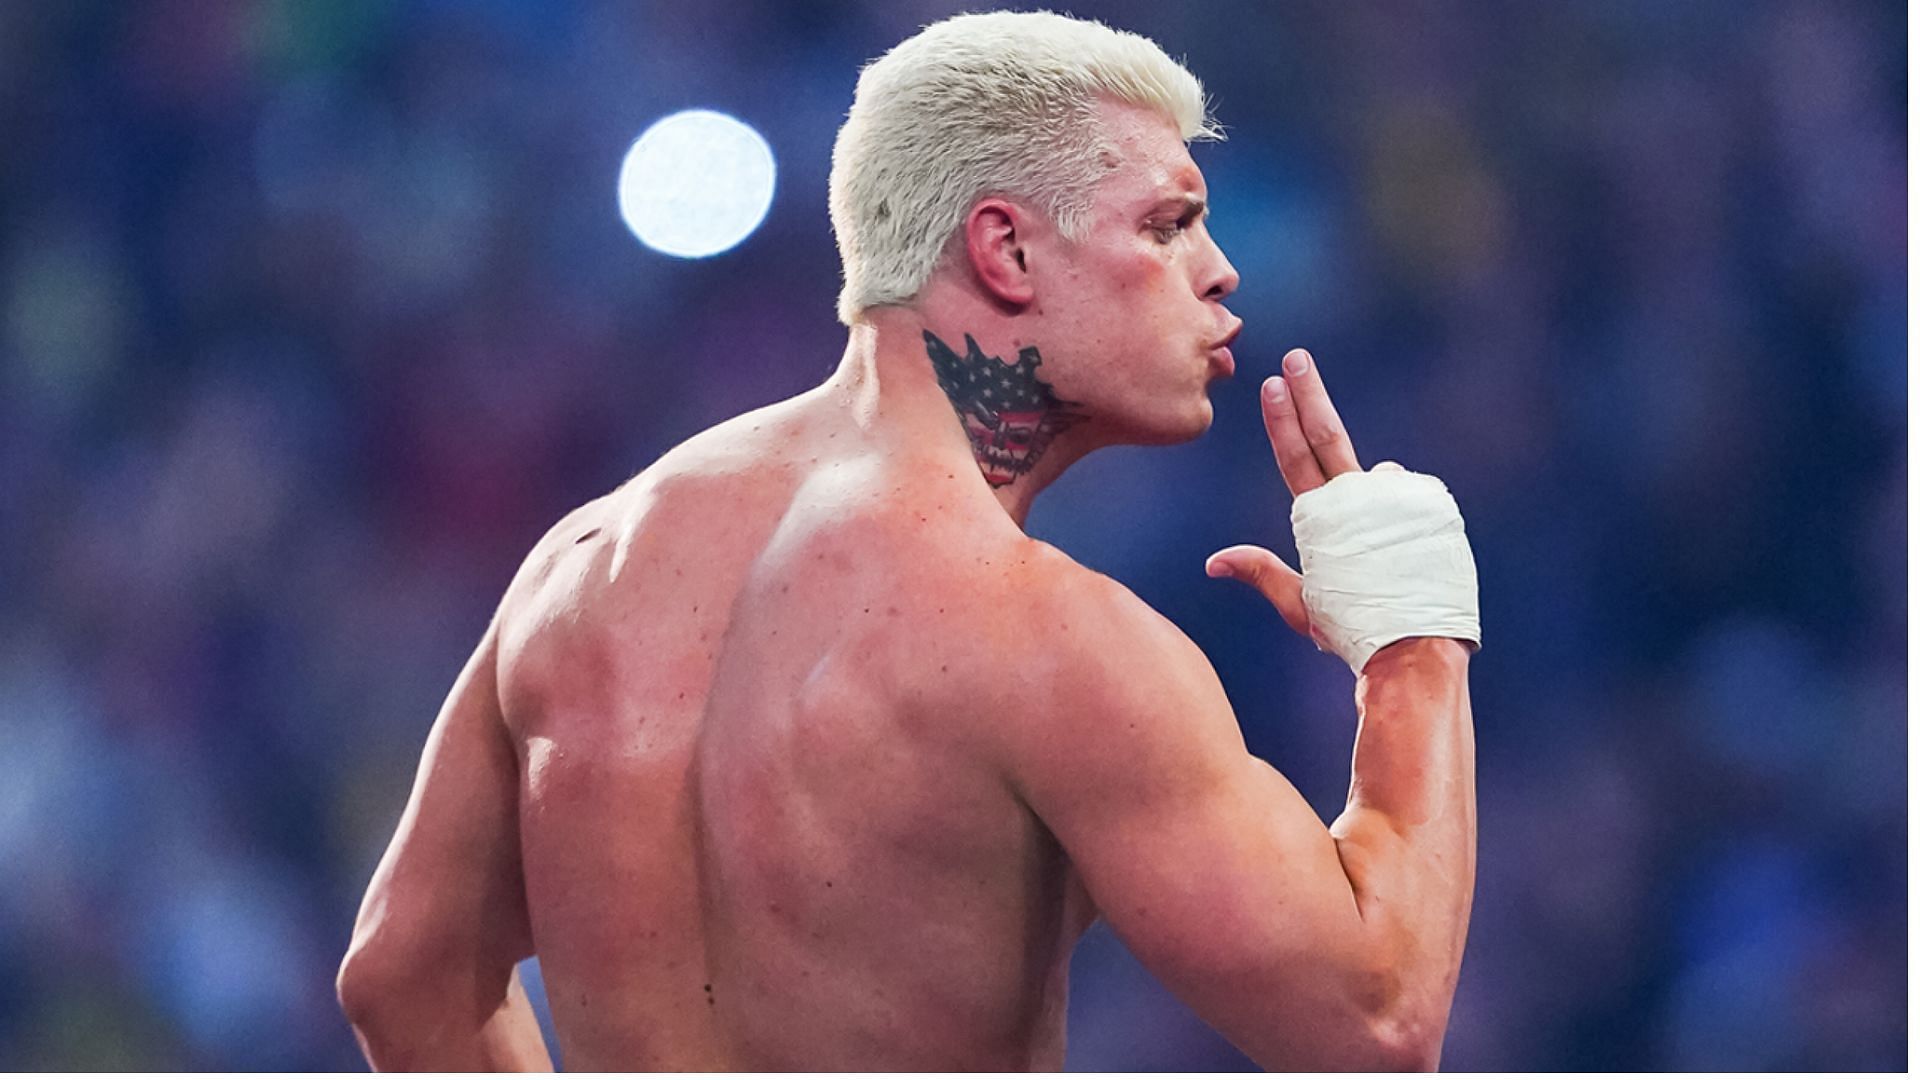 Will The American Nightmare open up the door for this AEW star to walk into WWE?